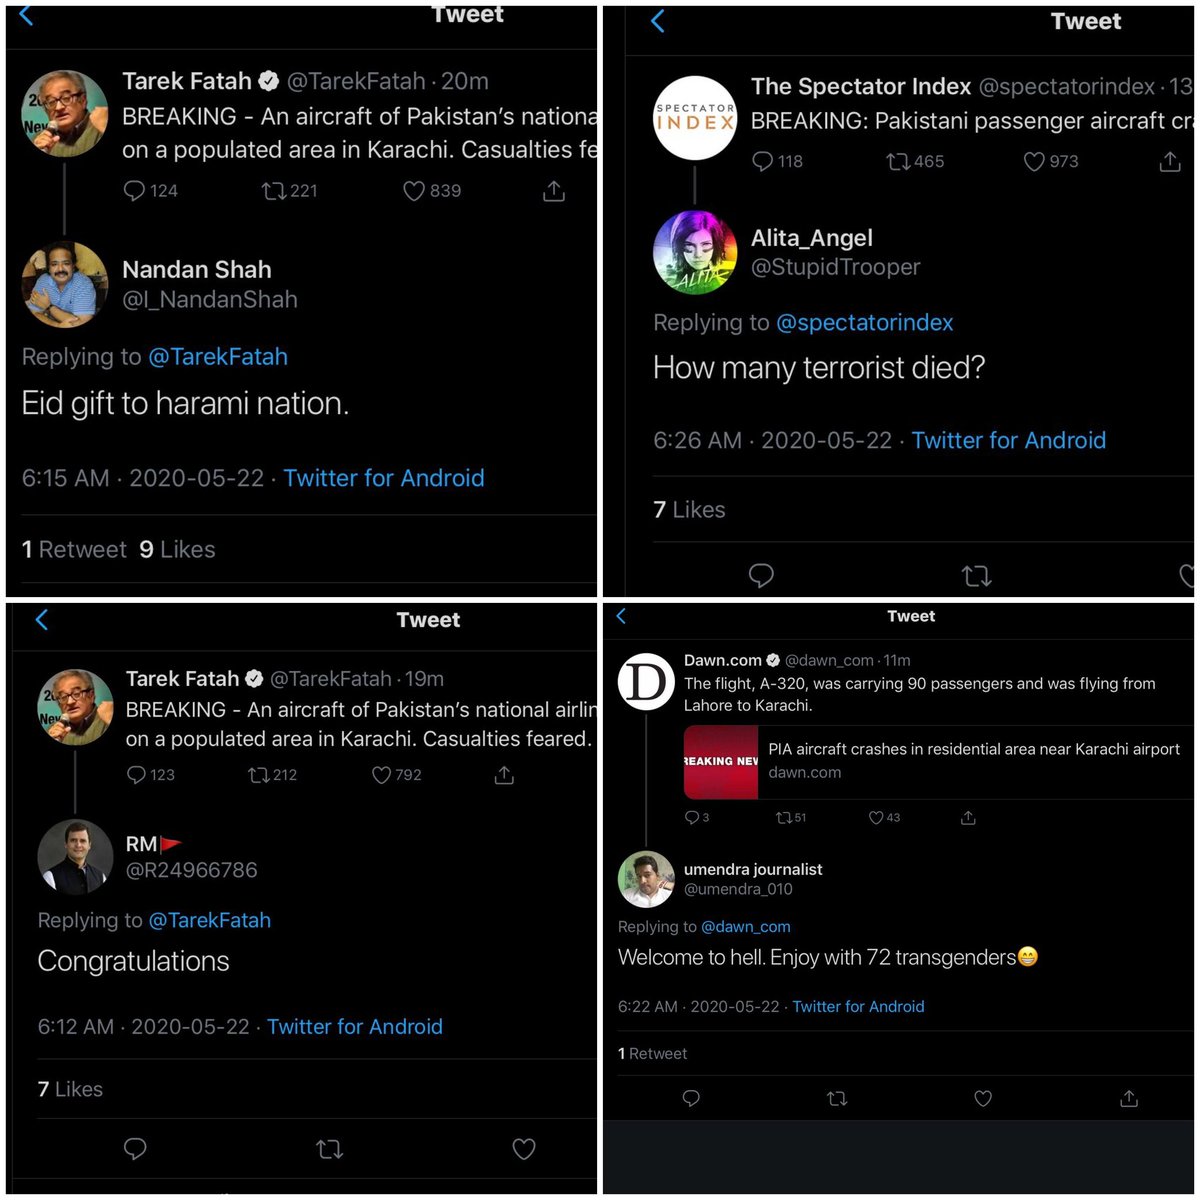 On every human tragedy in India or Pakistan most people on either side of the border express grief & support. Only a few morons on both sides show their inhuman side. But these few poisonous comments trend more on social media. Sane voices are ignored.
#planecrash #PIAPlaneCrash